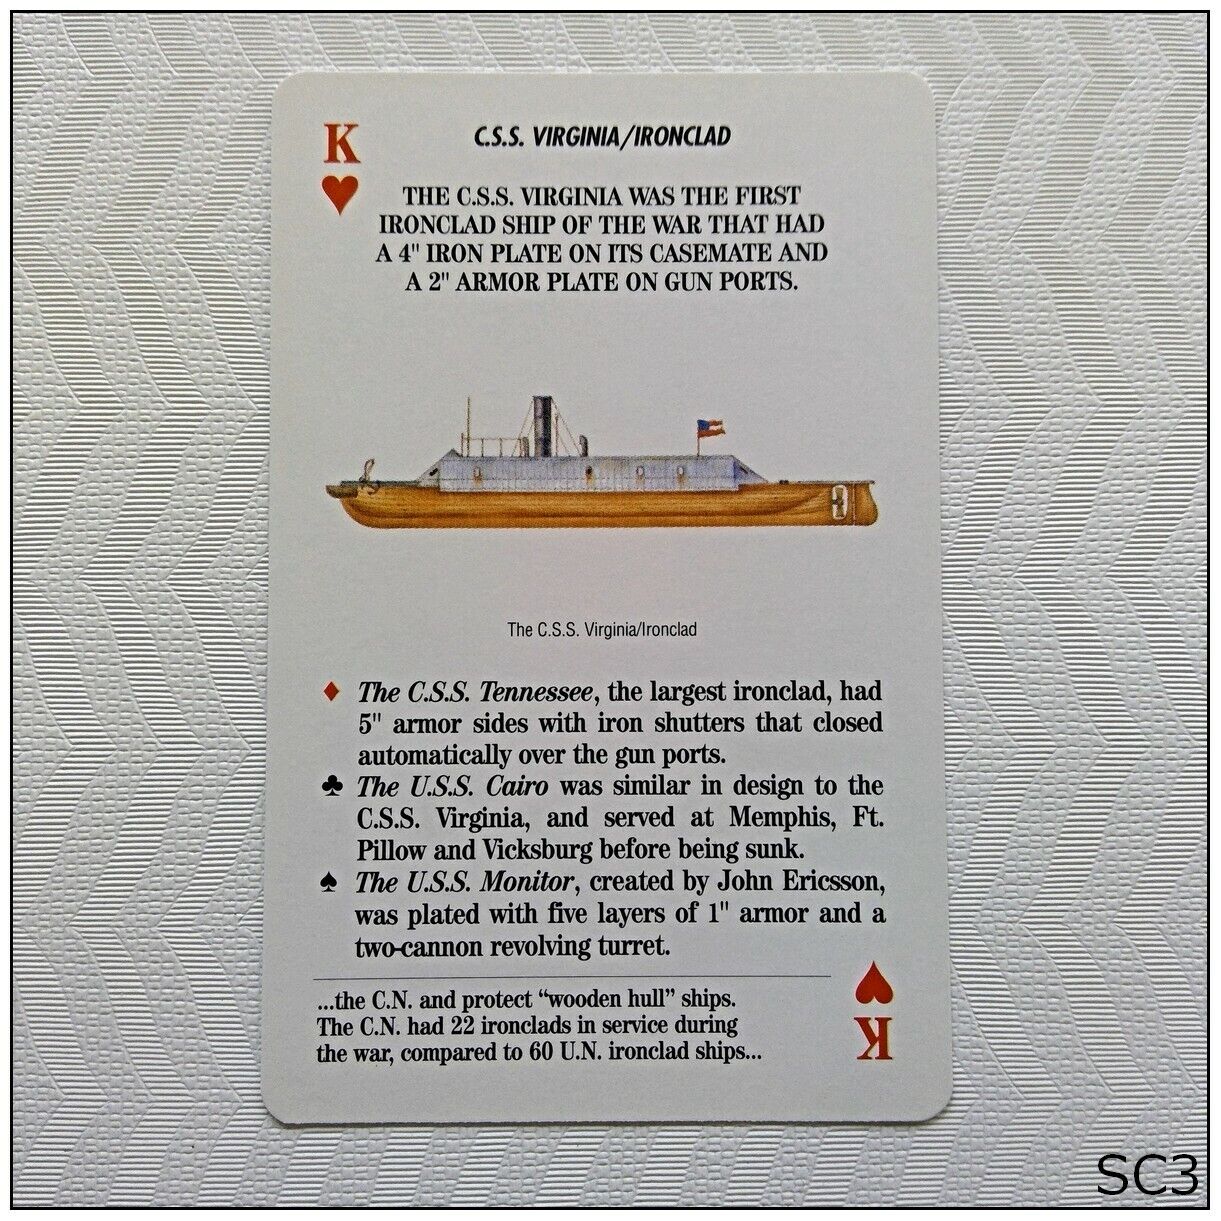 Arms and Armaments Civil War C.S.S. Virginia Ironclad Playing Card (SC3)